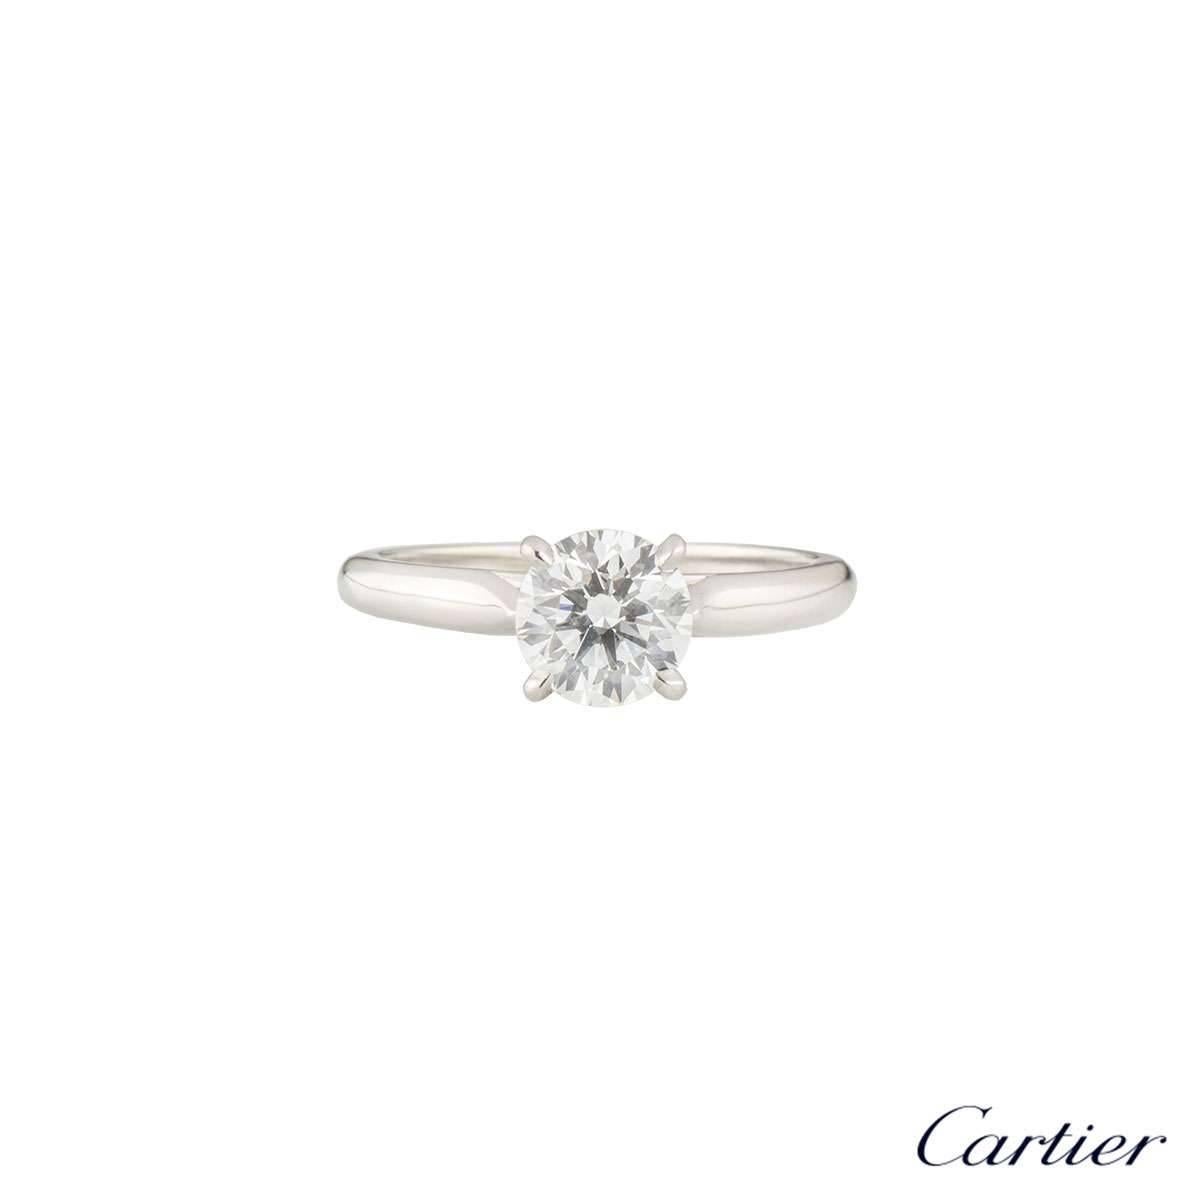 A beautiful platinum Cartier diamond engagement ring from the 1895 Solitaire collection. The ring comprises of a round brilliant cut diamond in a 4 claw setting with a total weight of 1.08ct, H colour and VS1 clarity. The ring is currently a UK size